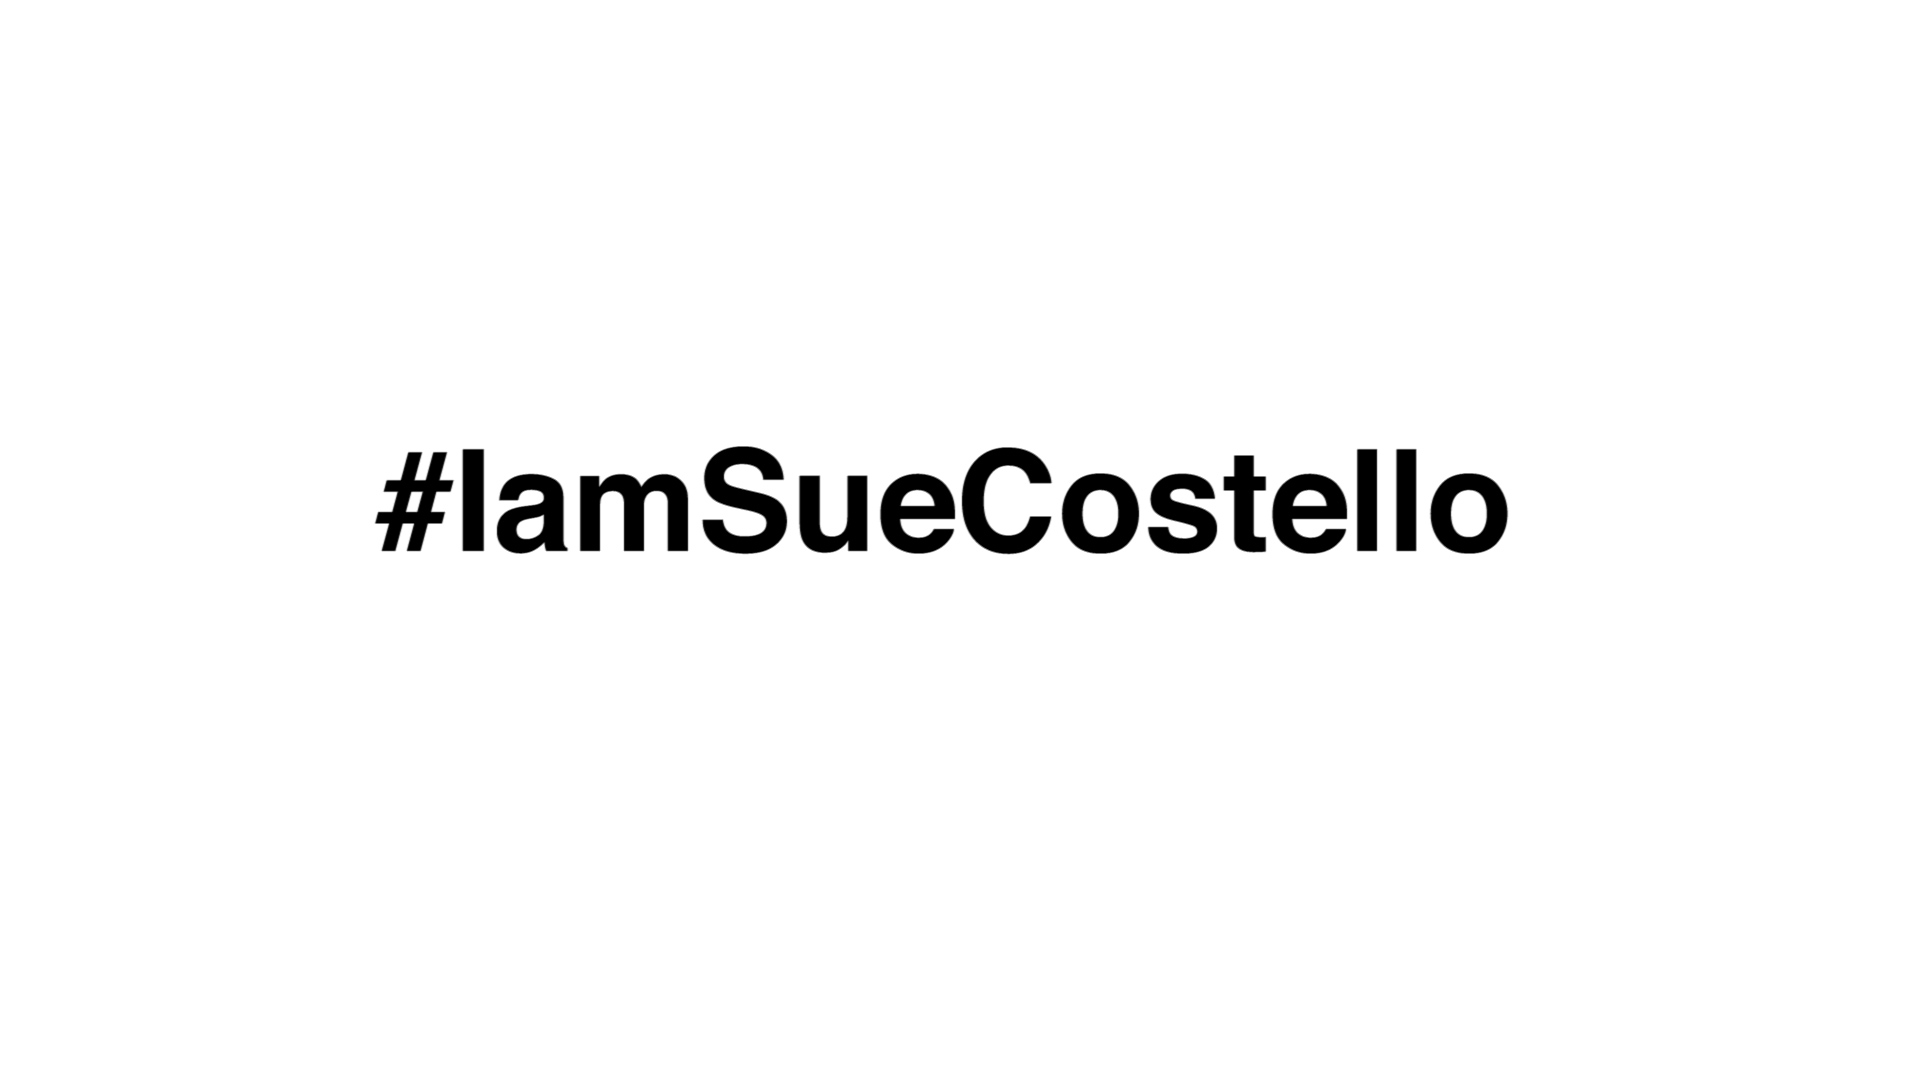  #IamSueCostello at Broadway Comedy Club on Wednesday, April 26th  